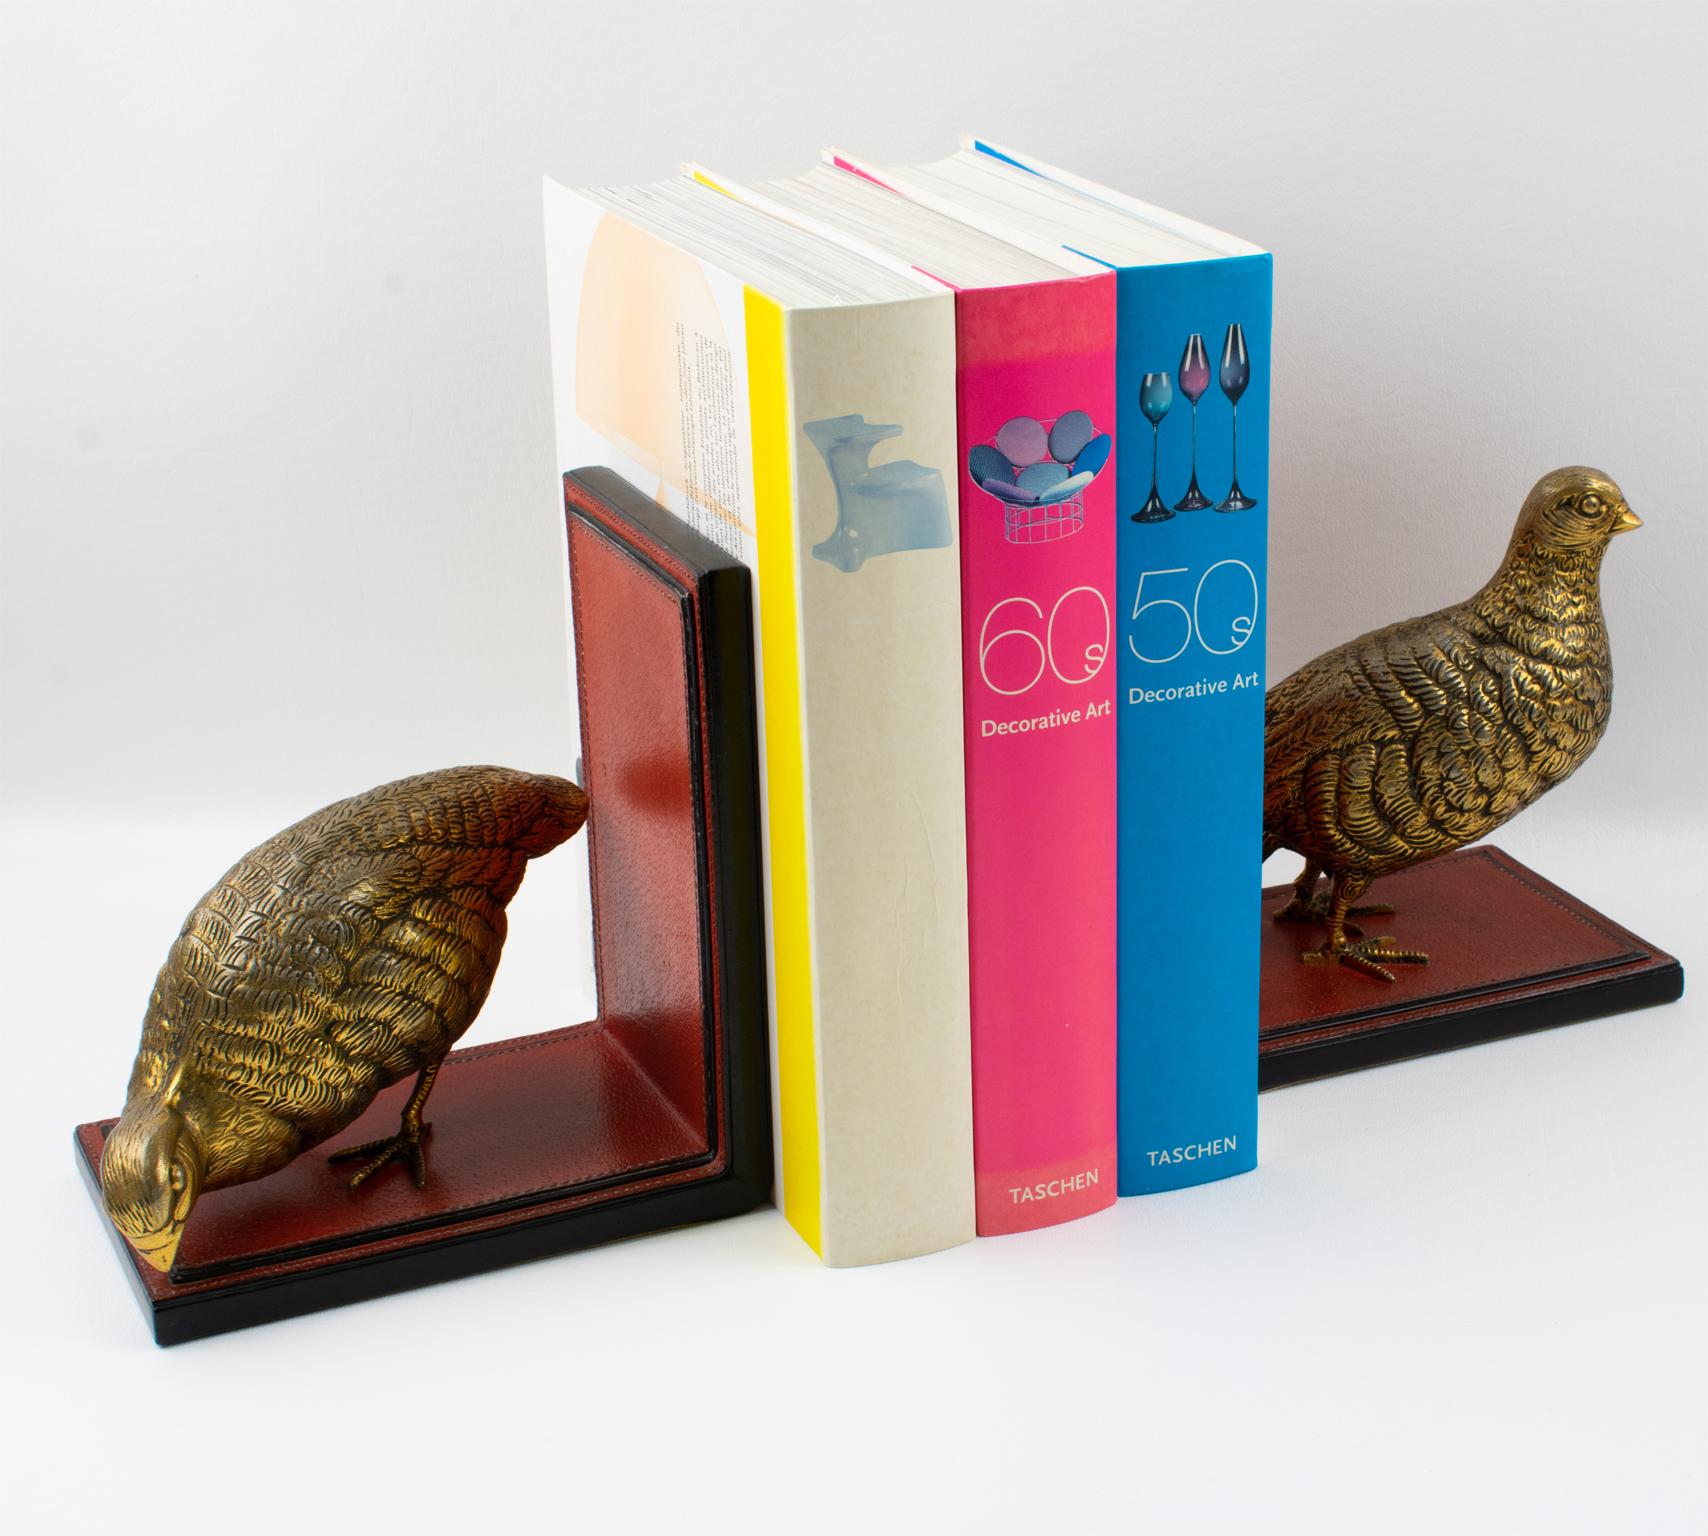 Gucci Italy Hand-Stitched Red Leather Bookends with Gilt Metal Partridges, 1970s For Sale 9